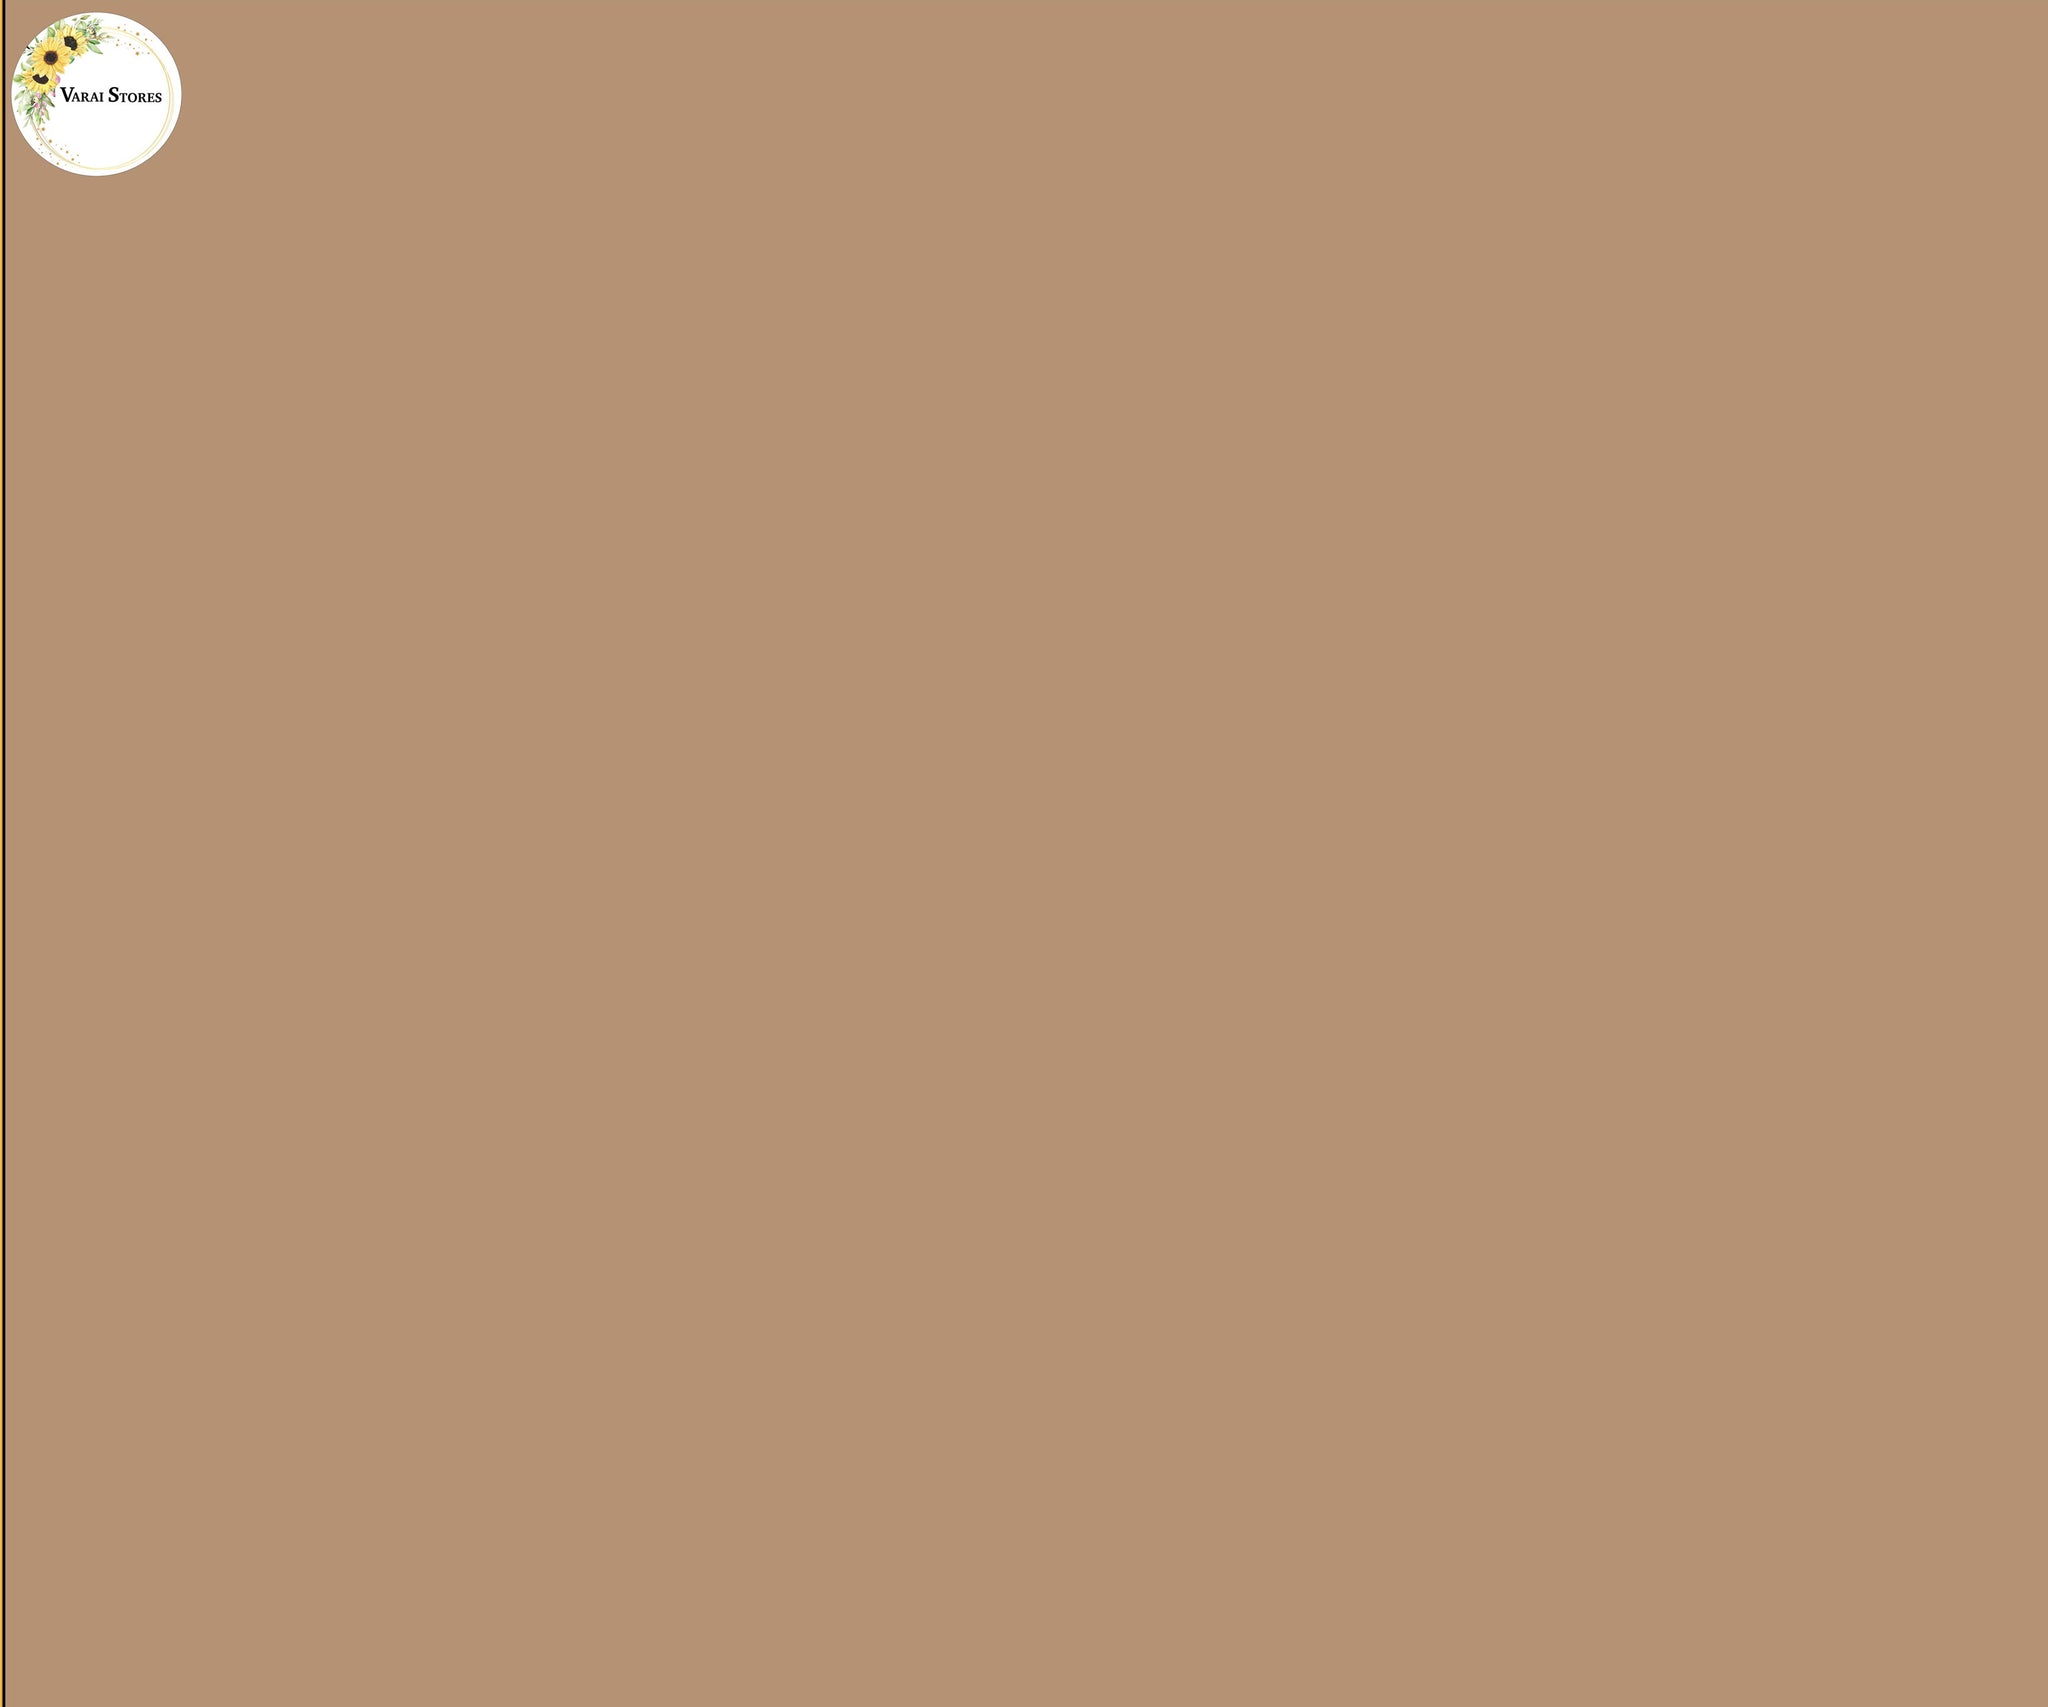 Brown Plain Wallpaper Vector Images over 240